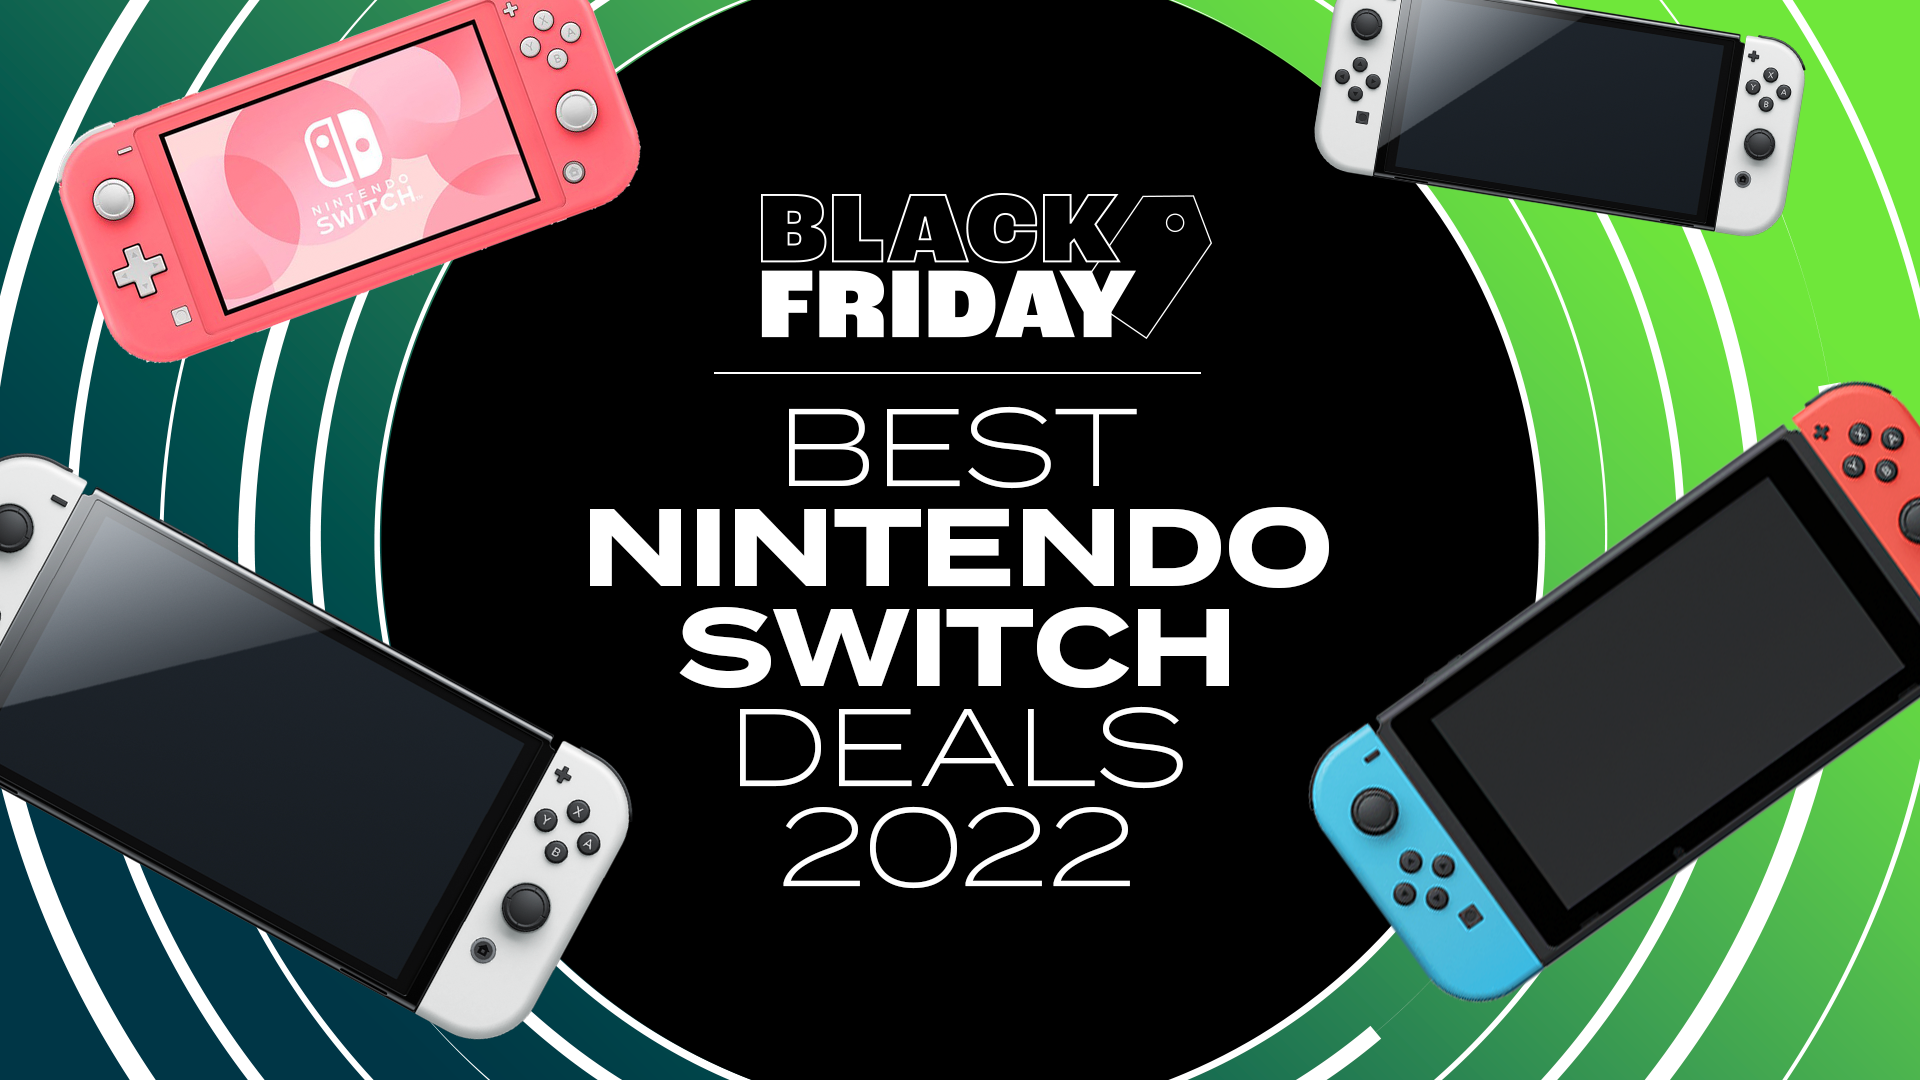 Image for Nintendo Switch Black Friday deals 2022: all the best offers LIVE